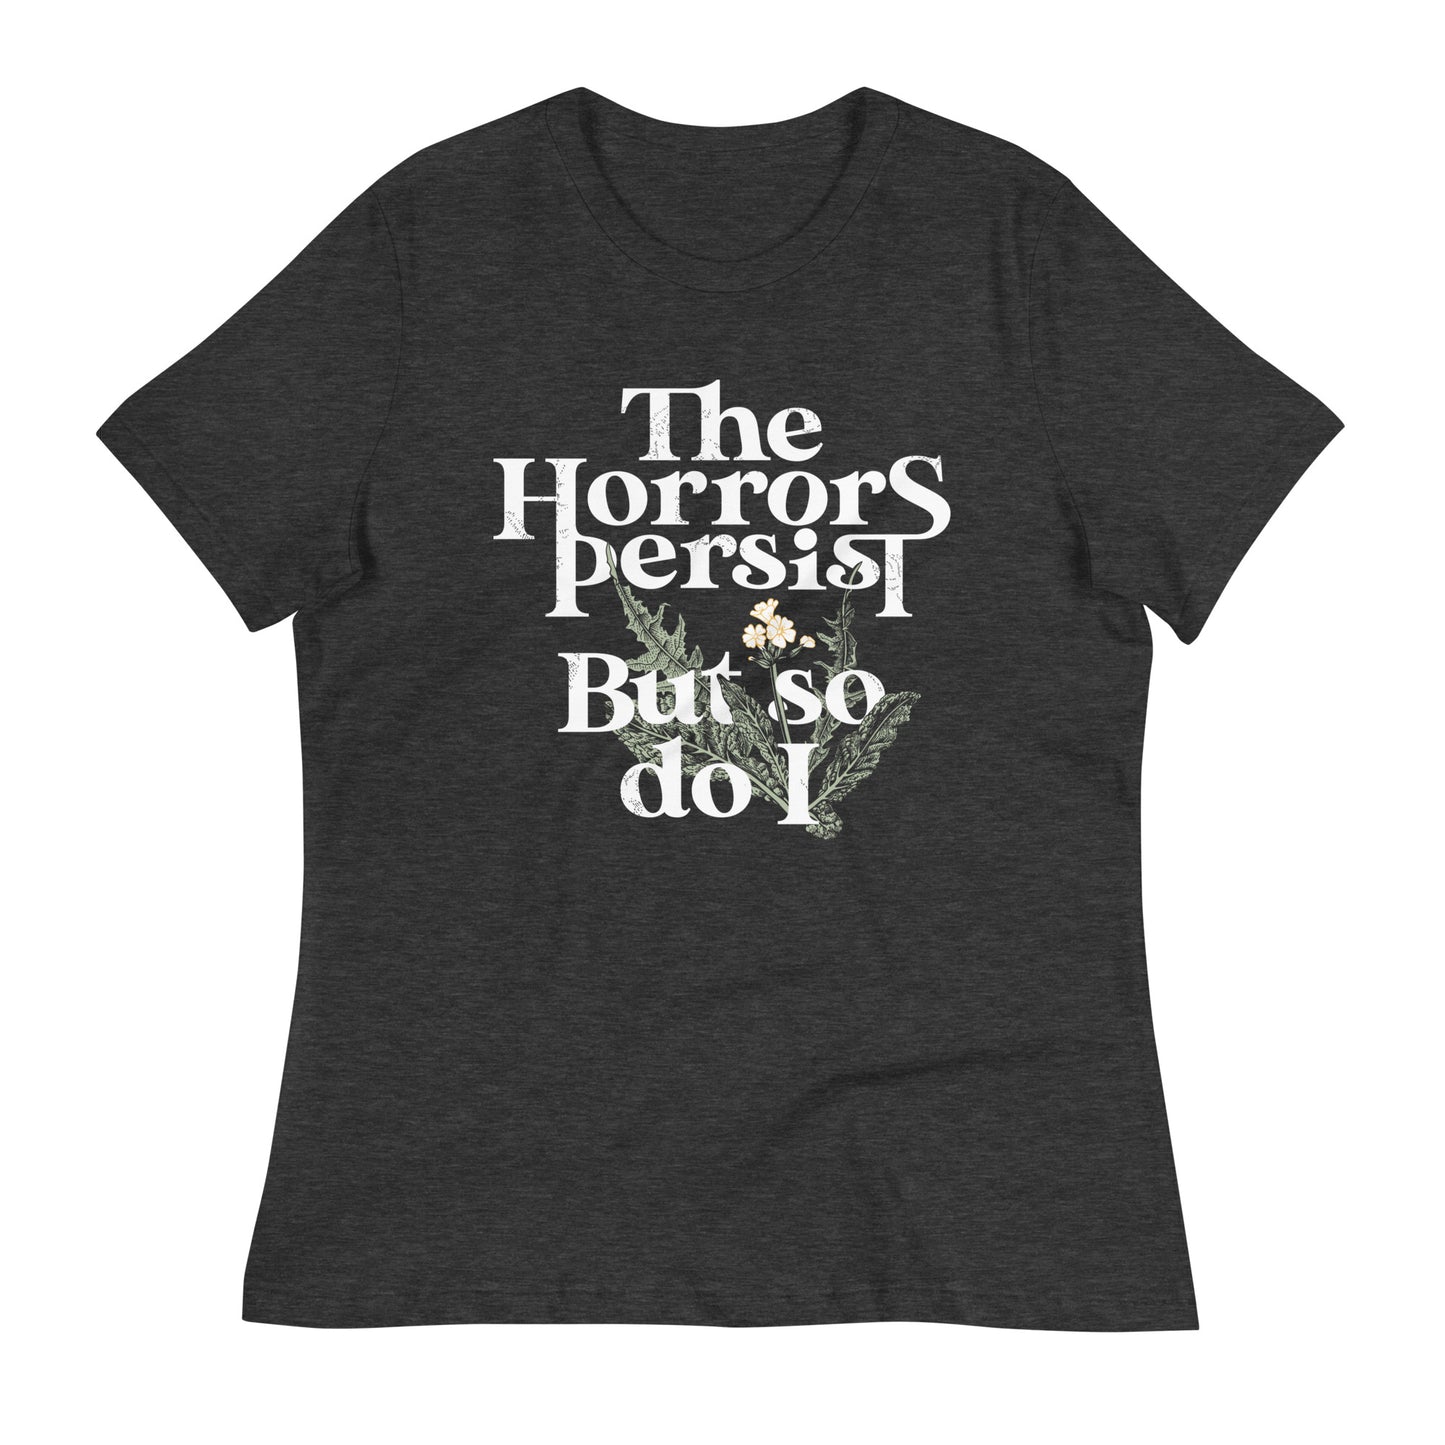 The Horrors Persist But So Do I Women's Signature Tee